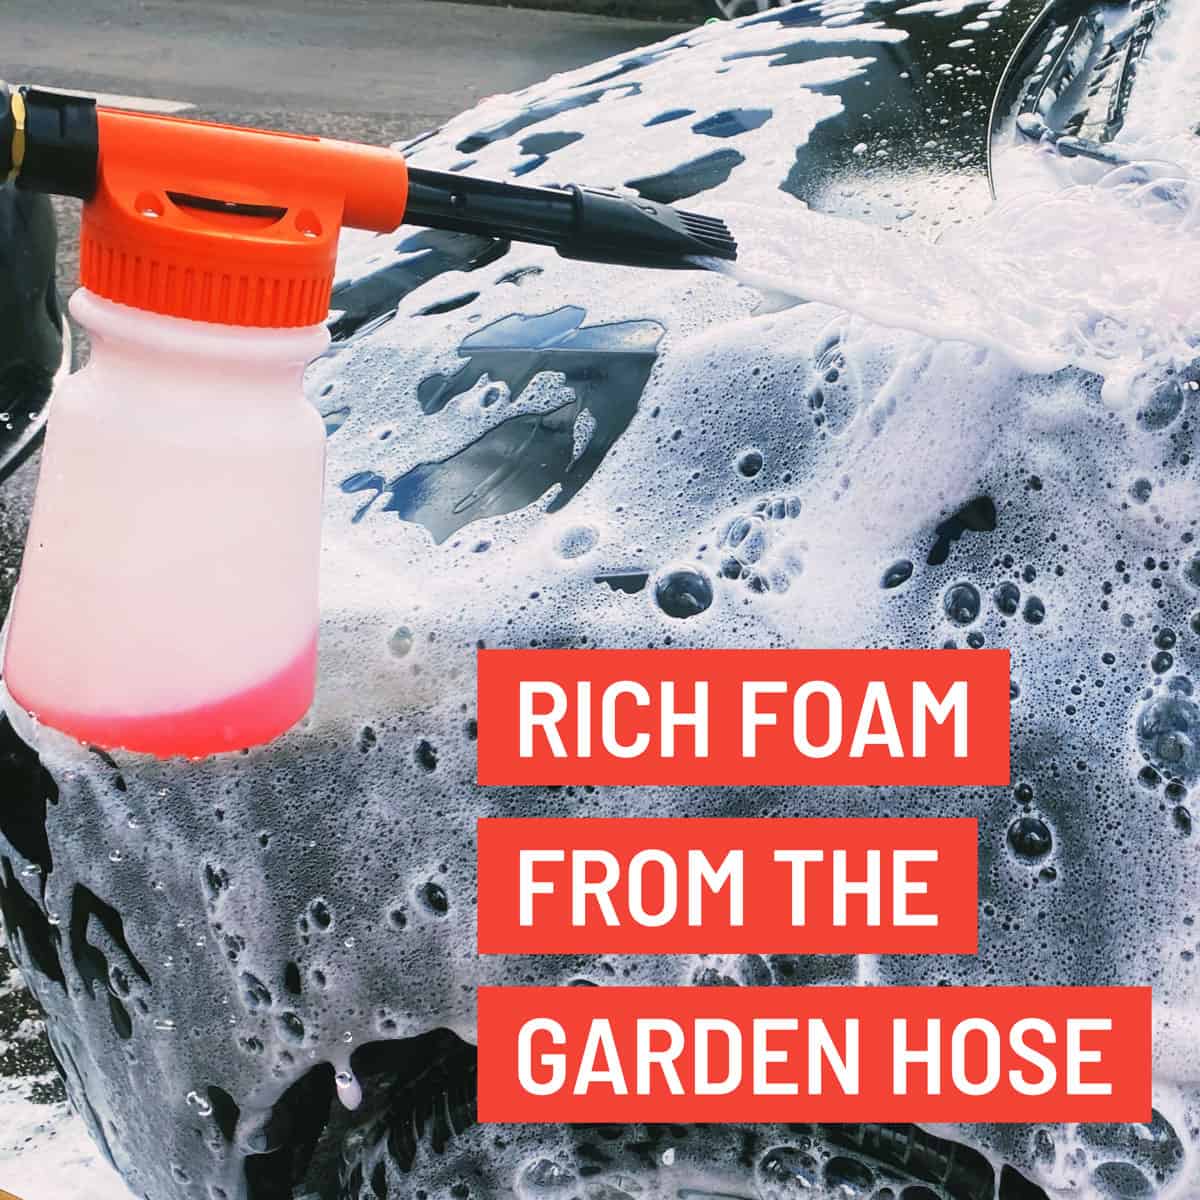 Hose Pipe Foam Lance - Multi-Ratio Adjustment for a rich lather